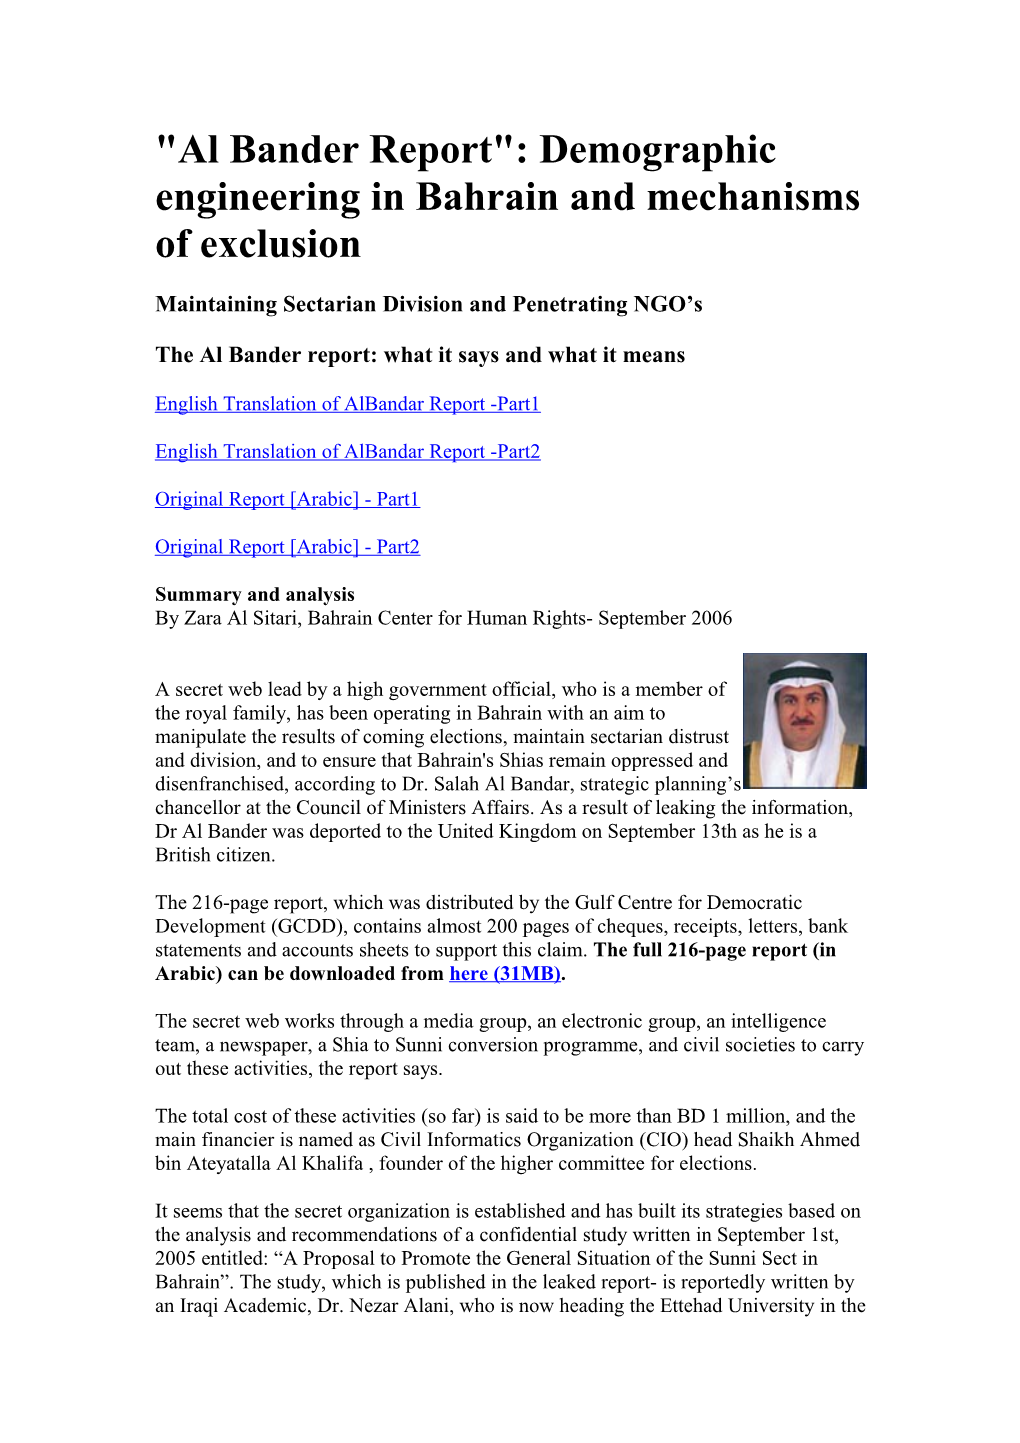 Al Bander Report : Demographic Engineering in Bahrain and Mechanisms of Exclusion